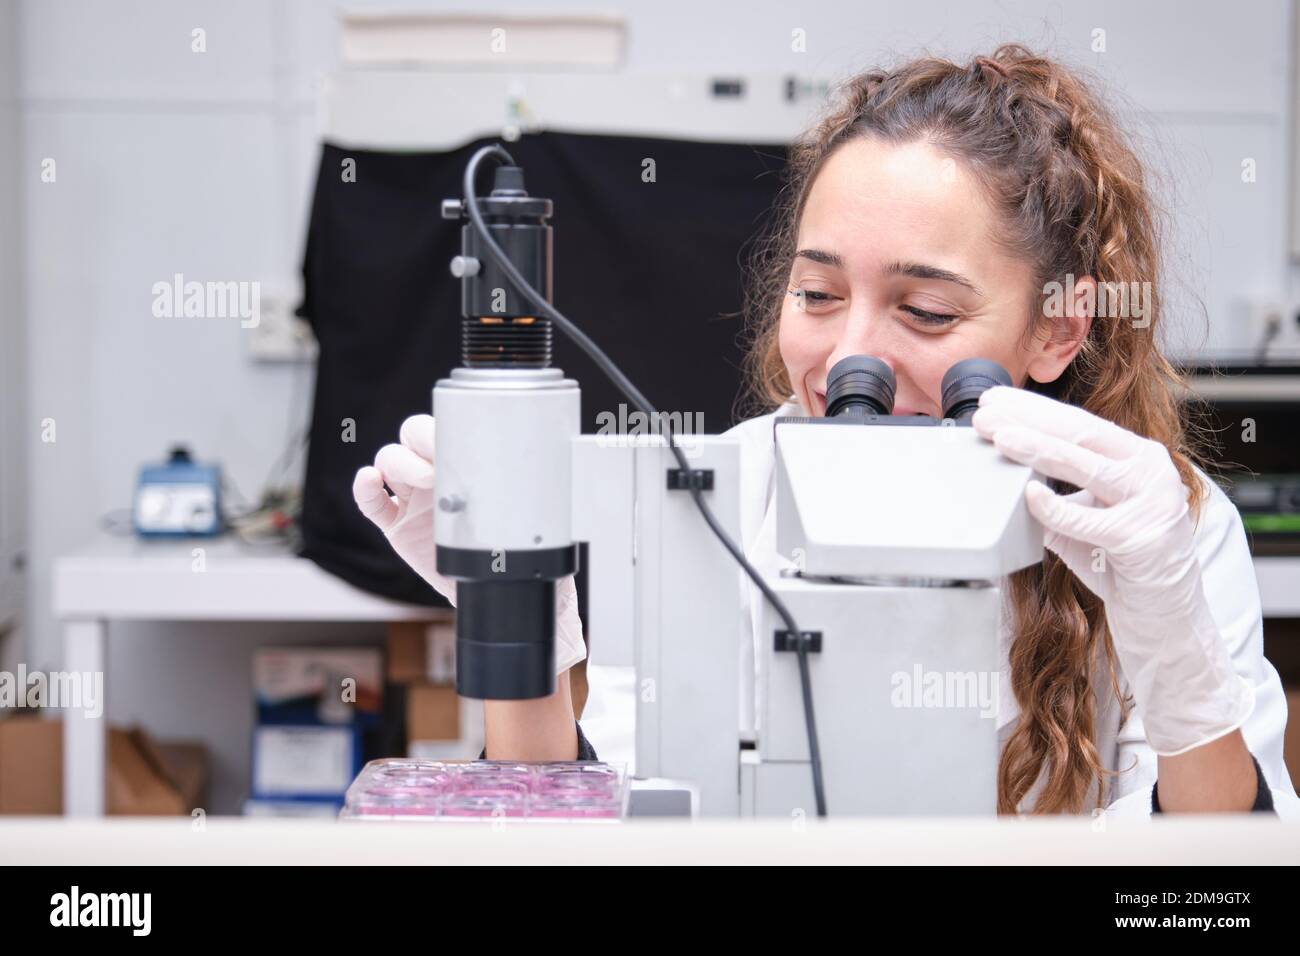 Young female scientist looking through a microscope in a laboratory. Laboratory research concept. Stock Photo